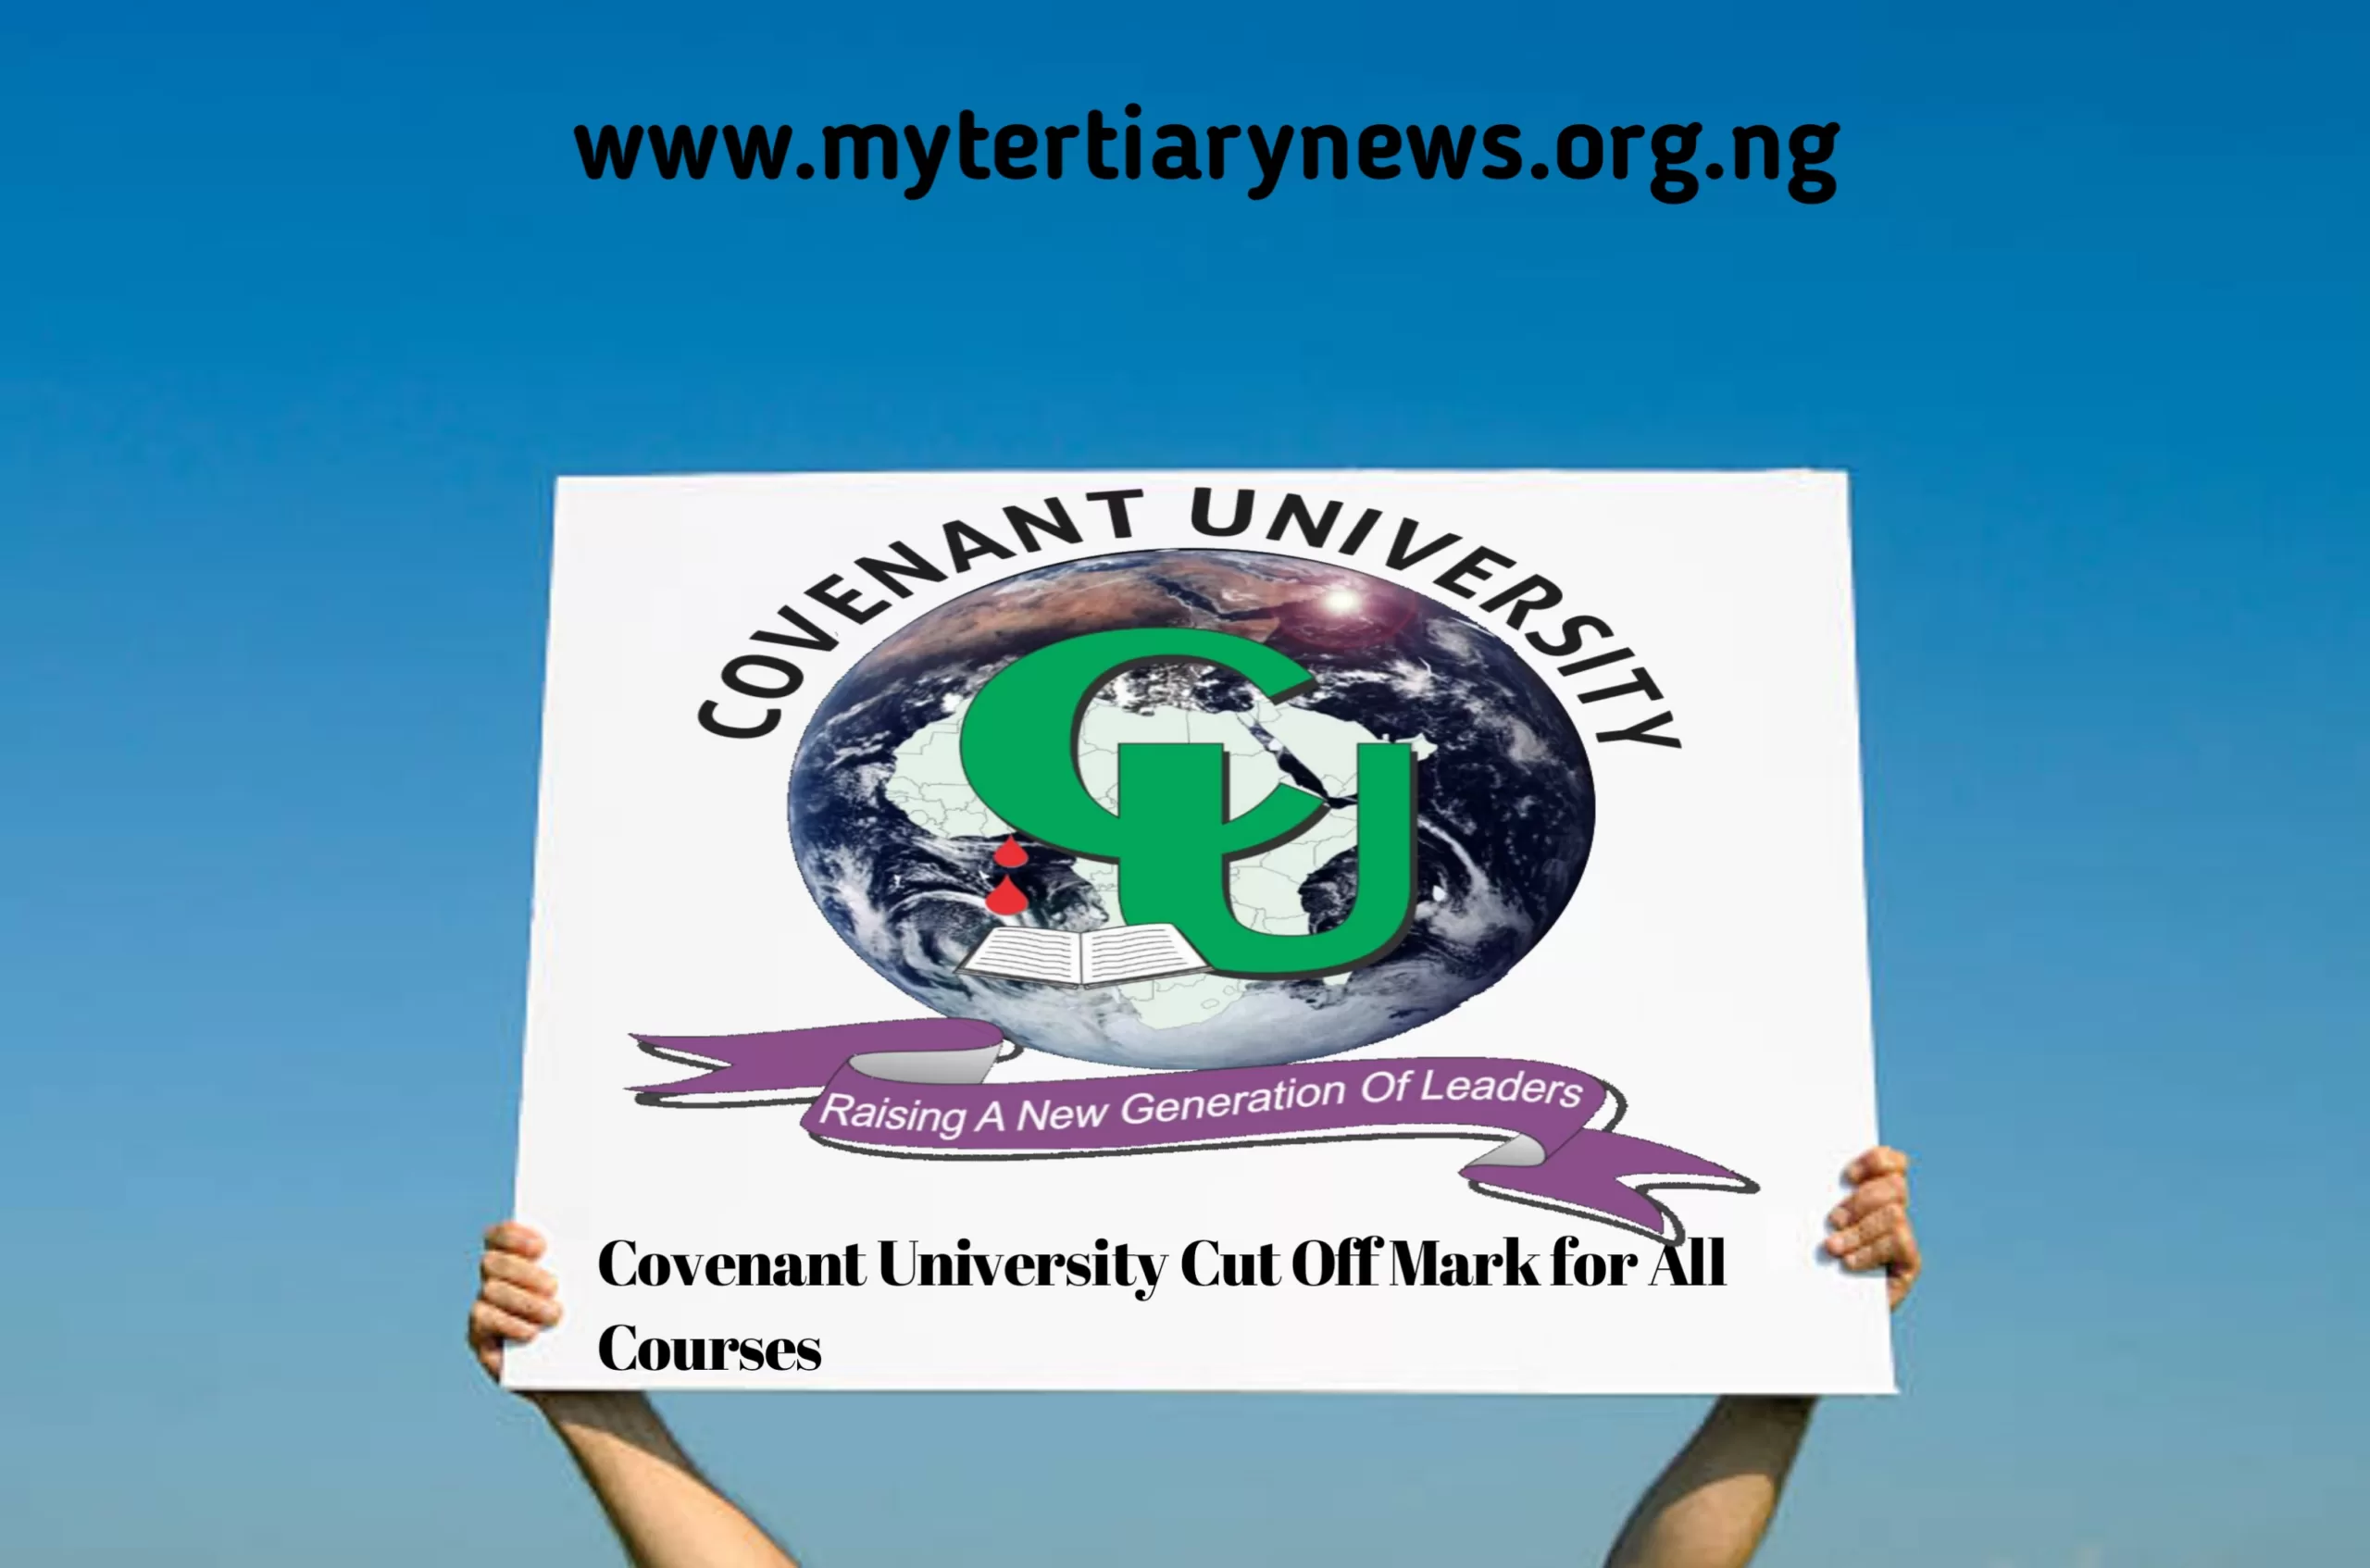 Covenant University Image || Covenant University Cut Off Mark for All Courses